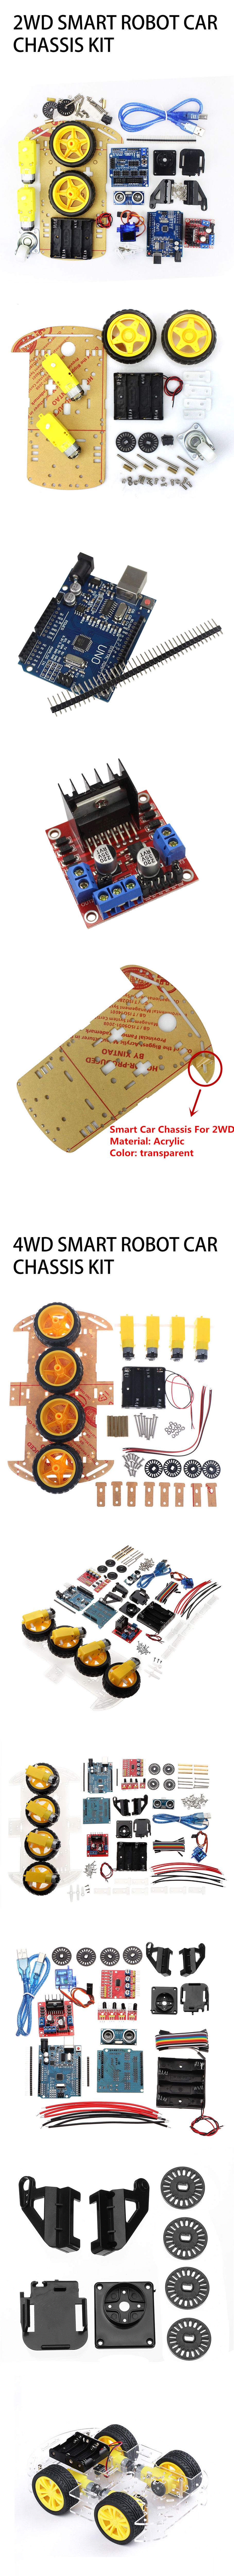 New-Avoidance-Tracking-Motor-Smart-Robot-Car-Chassis-Kit-Speed-Encoder-Battery-Box-2WD-4WD-Ultrasoni-1976184-1